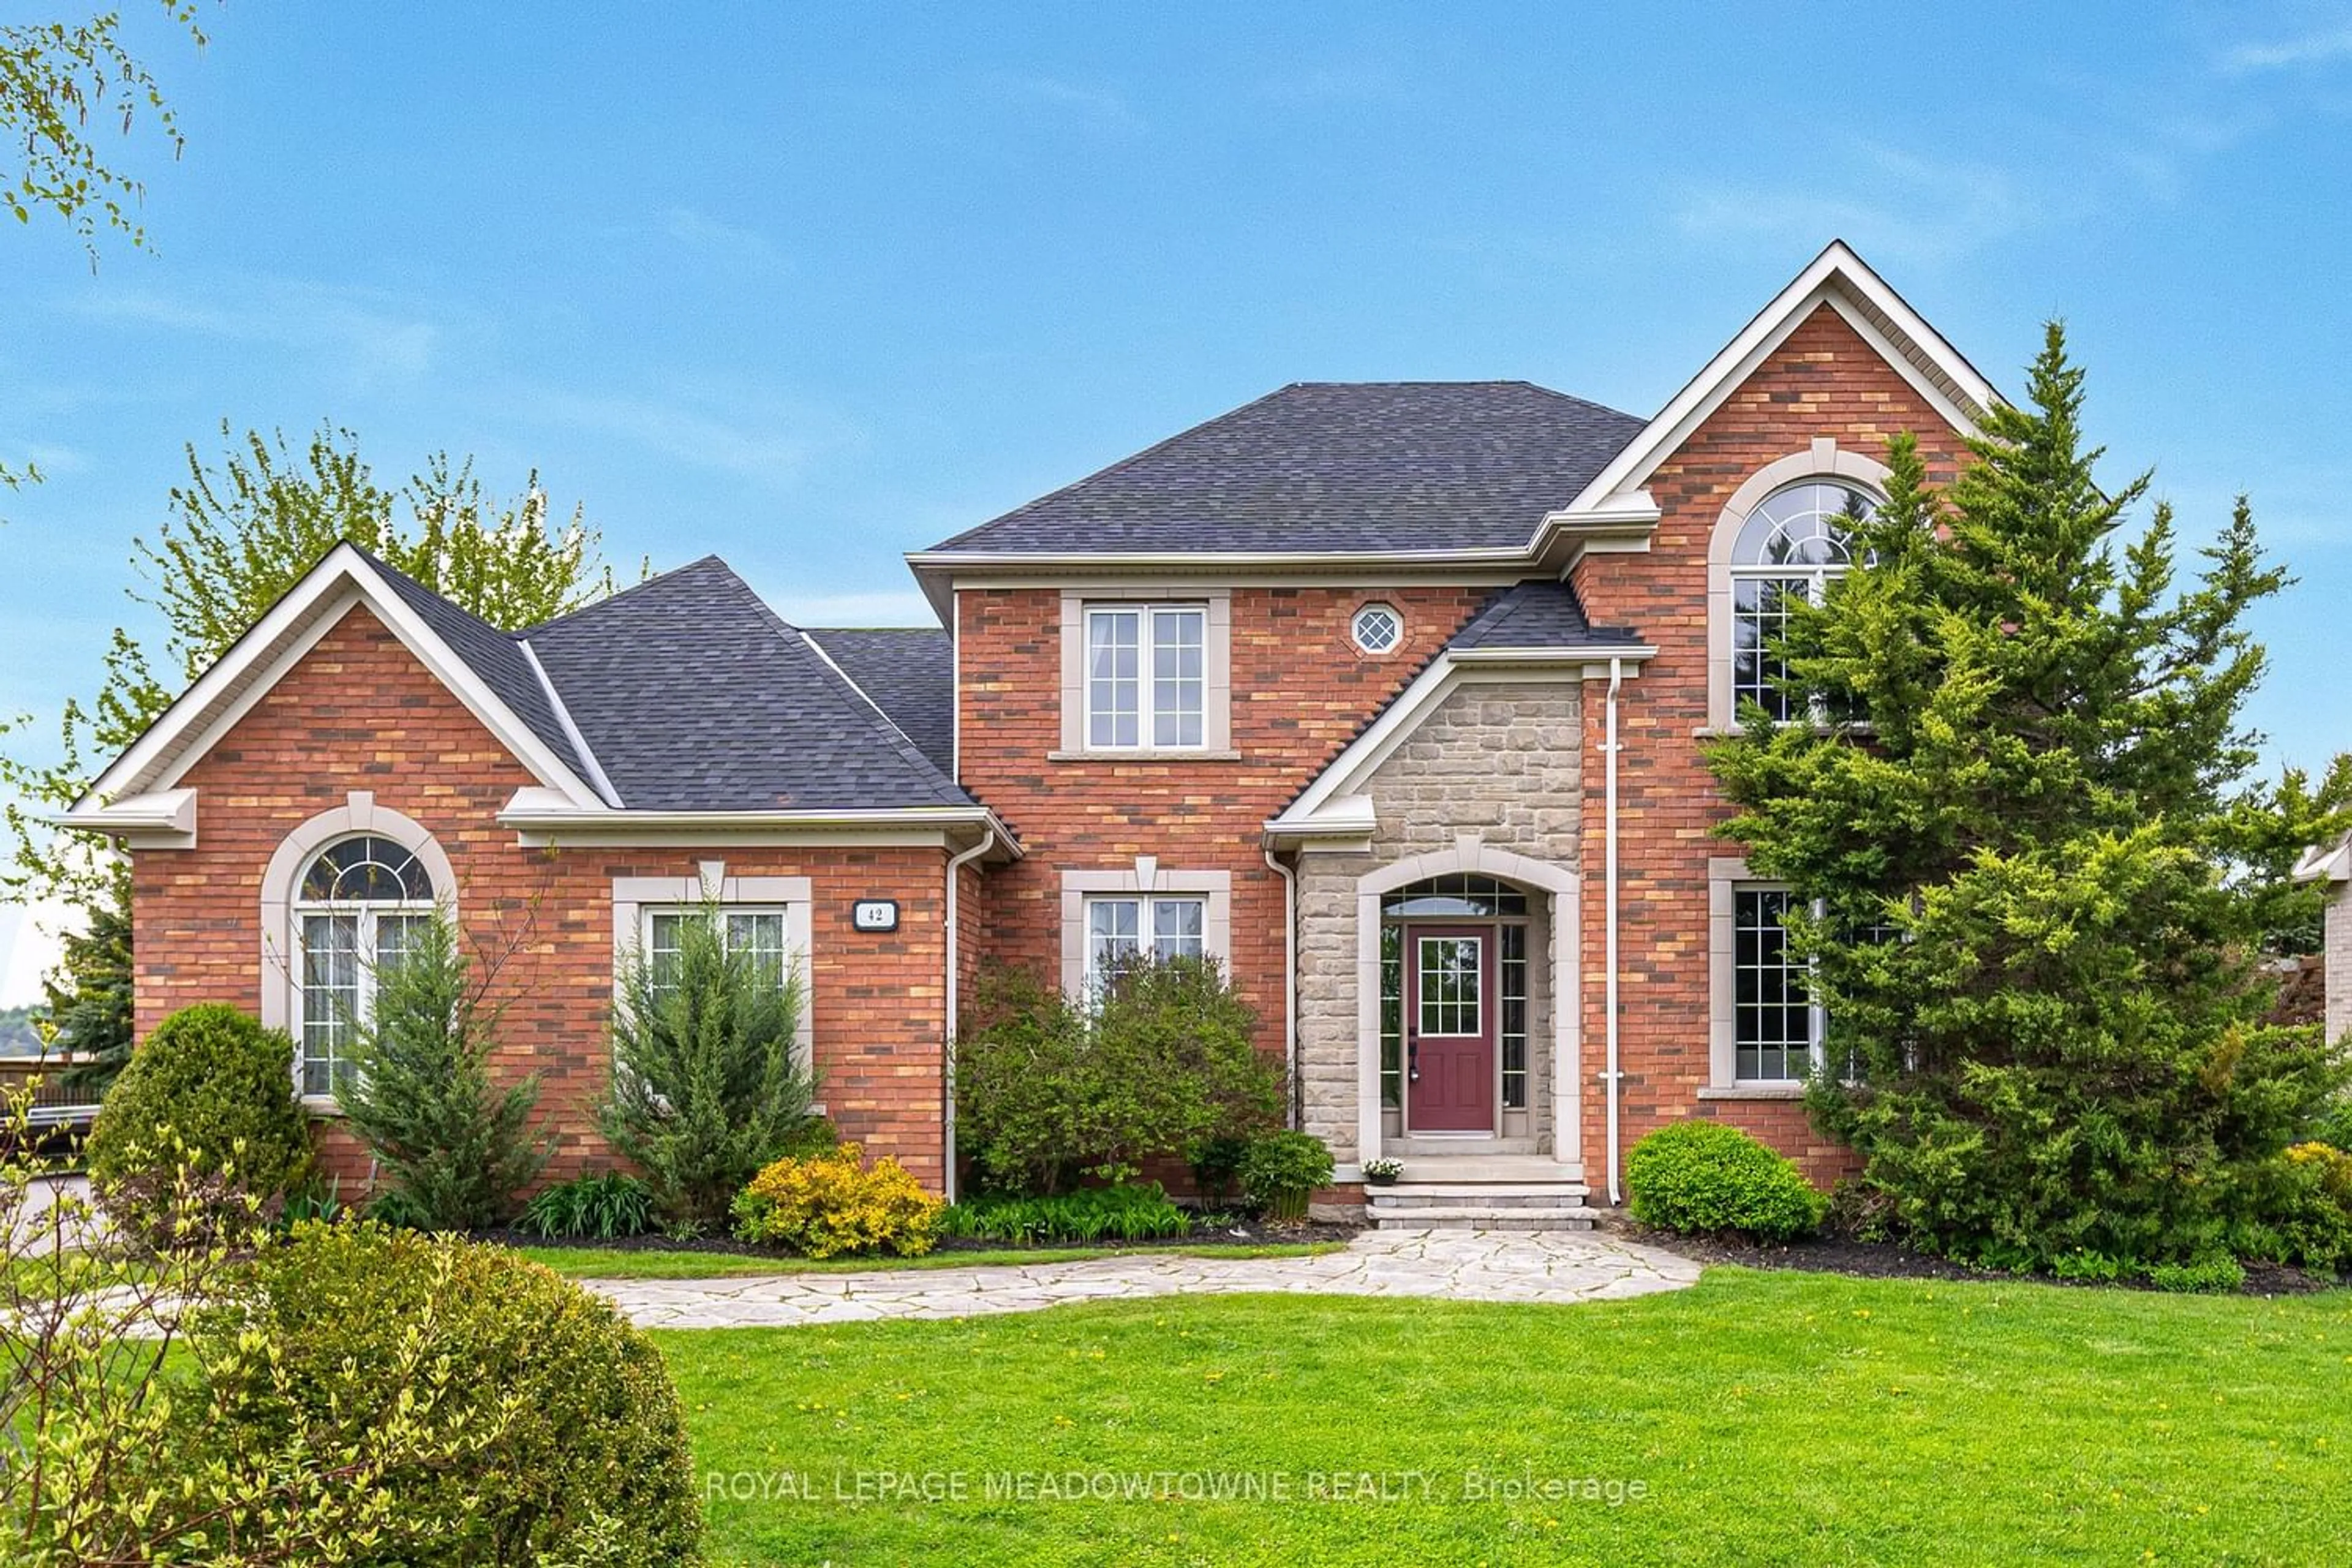 Home with brick exterior material for 42 Upper Canada Dr, Erin Ontario N0B 1Z0